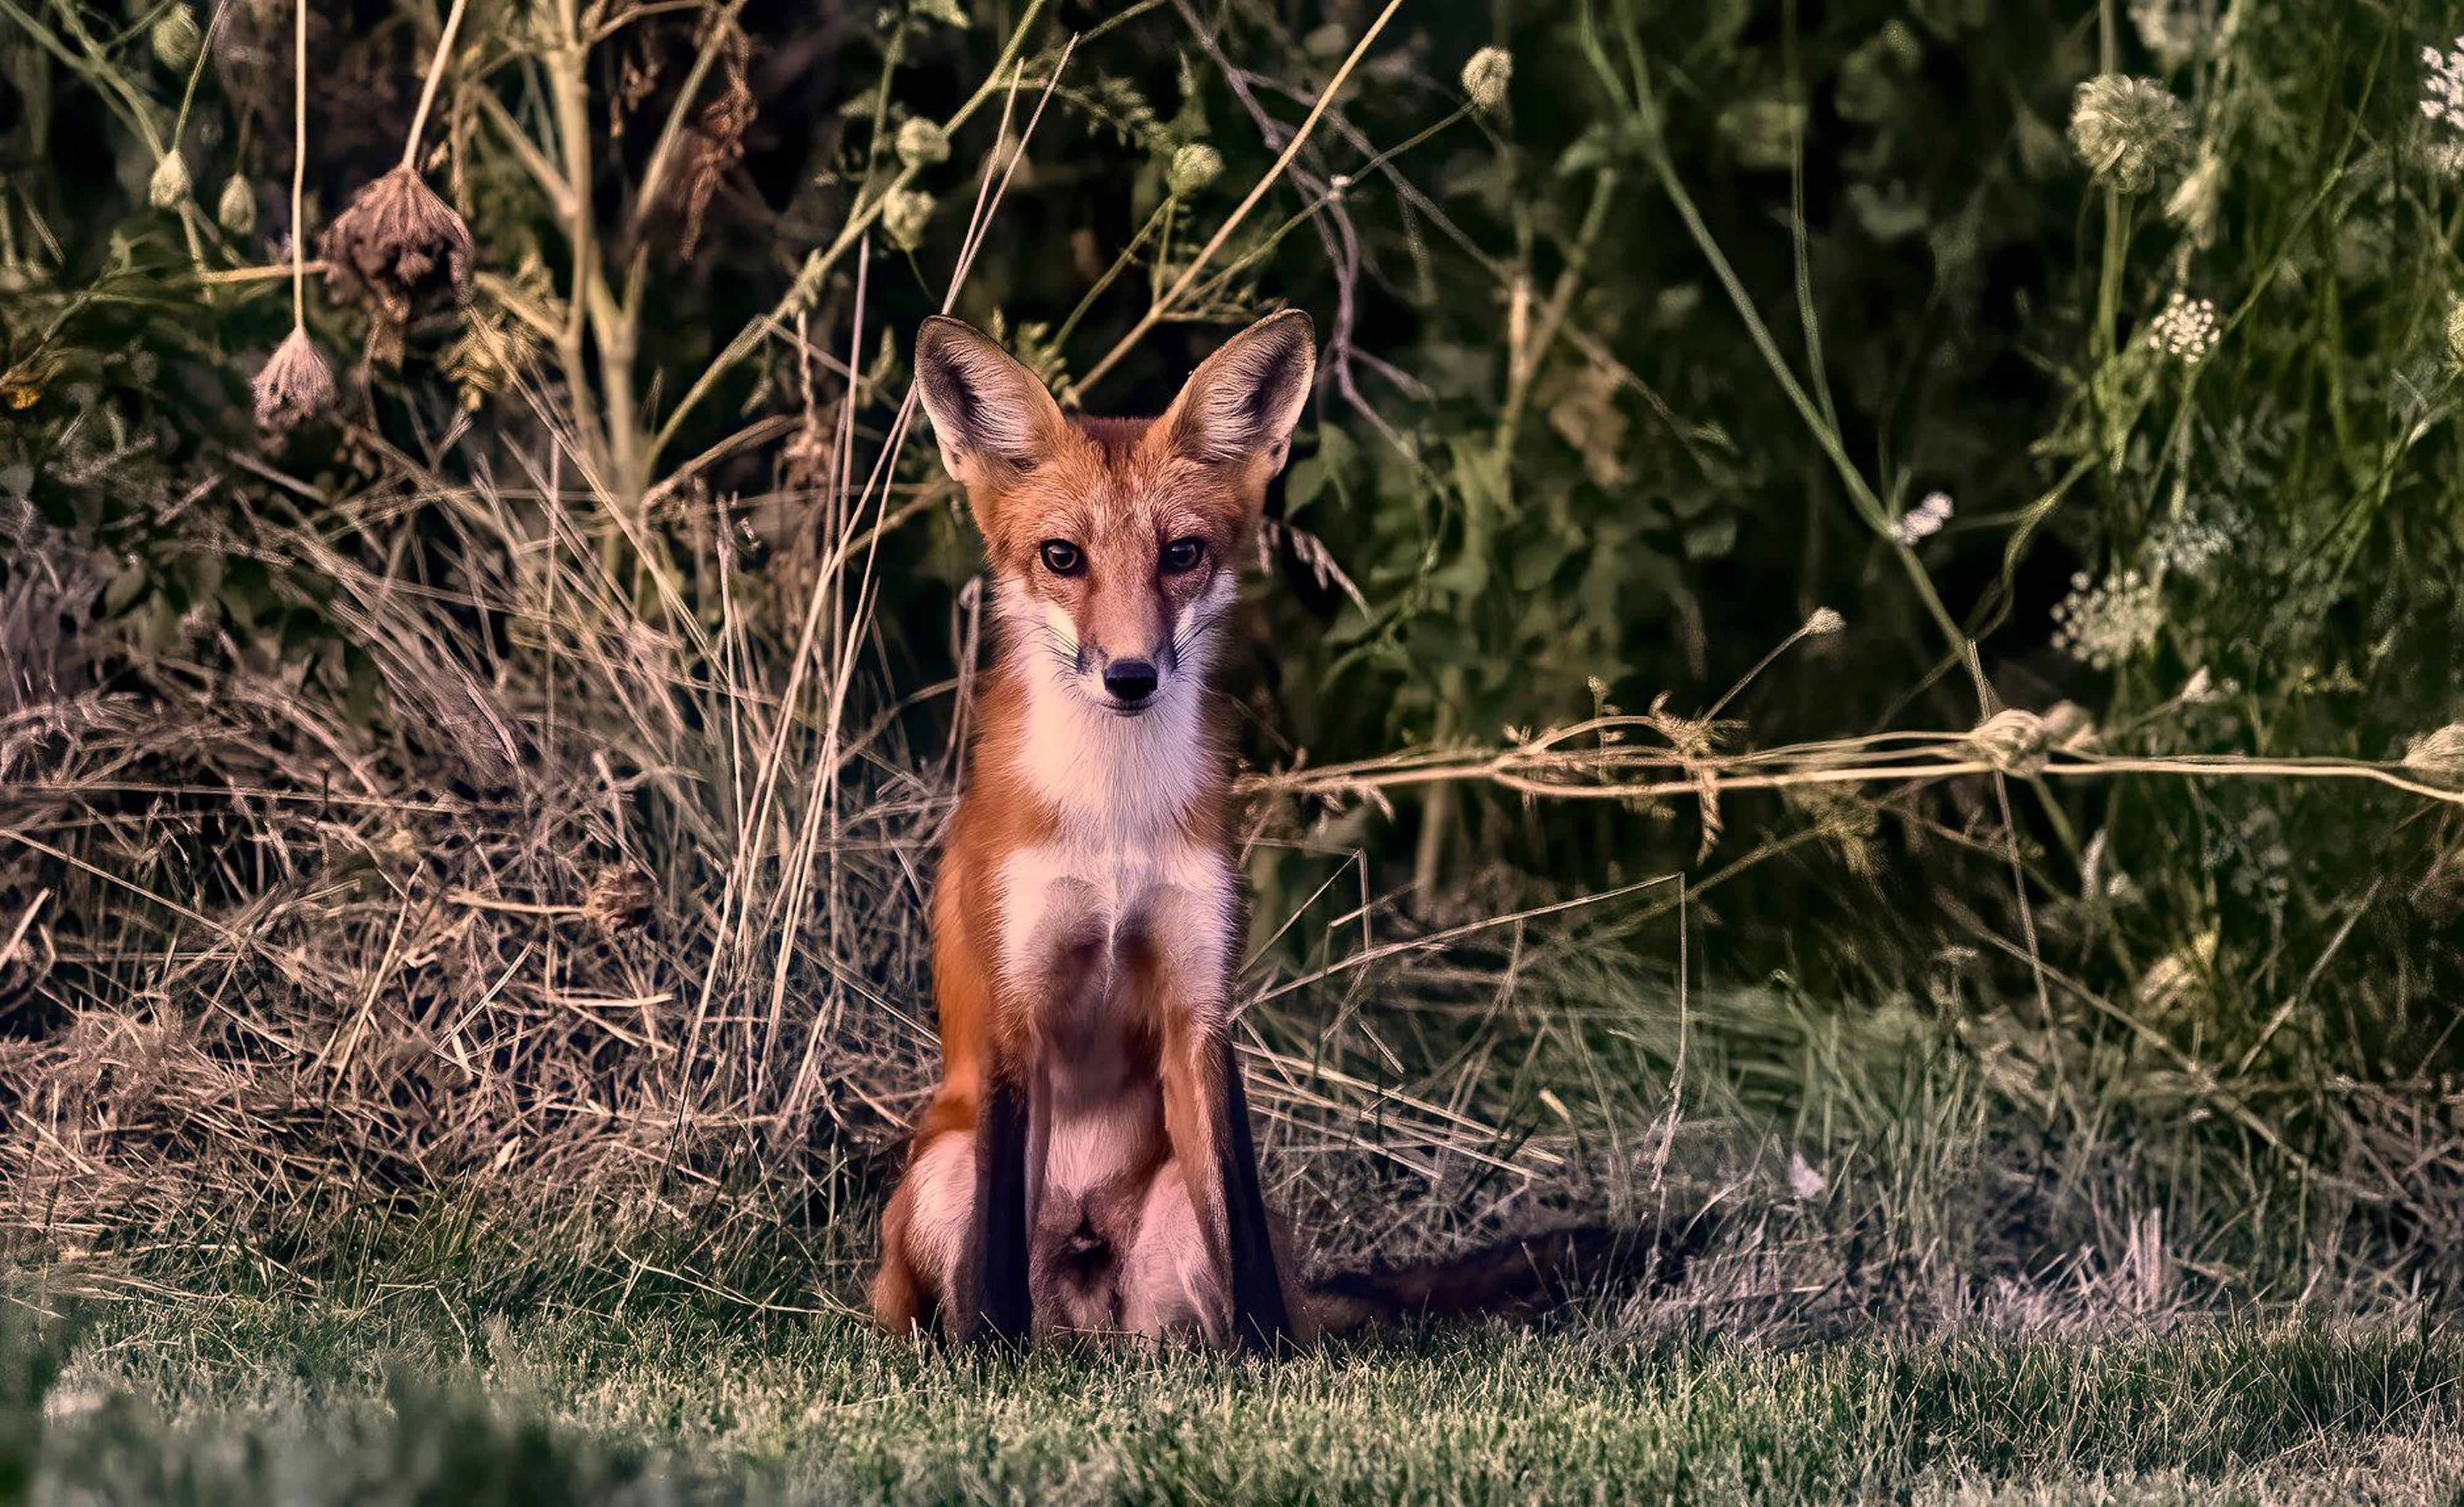 A red fox sitting in grass.